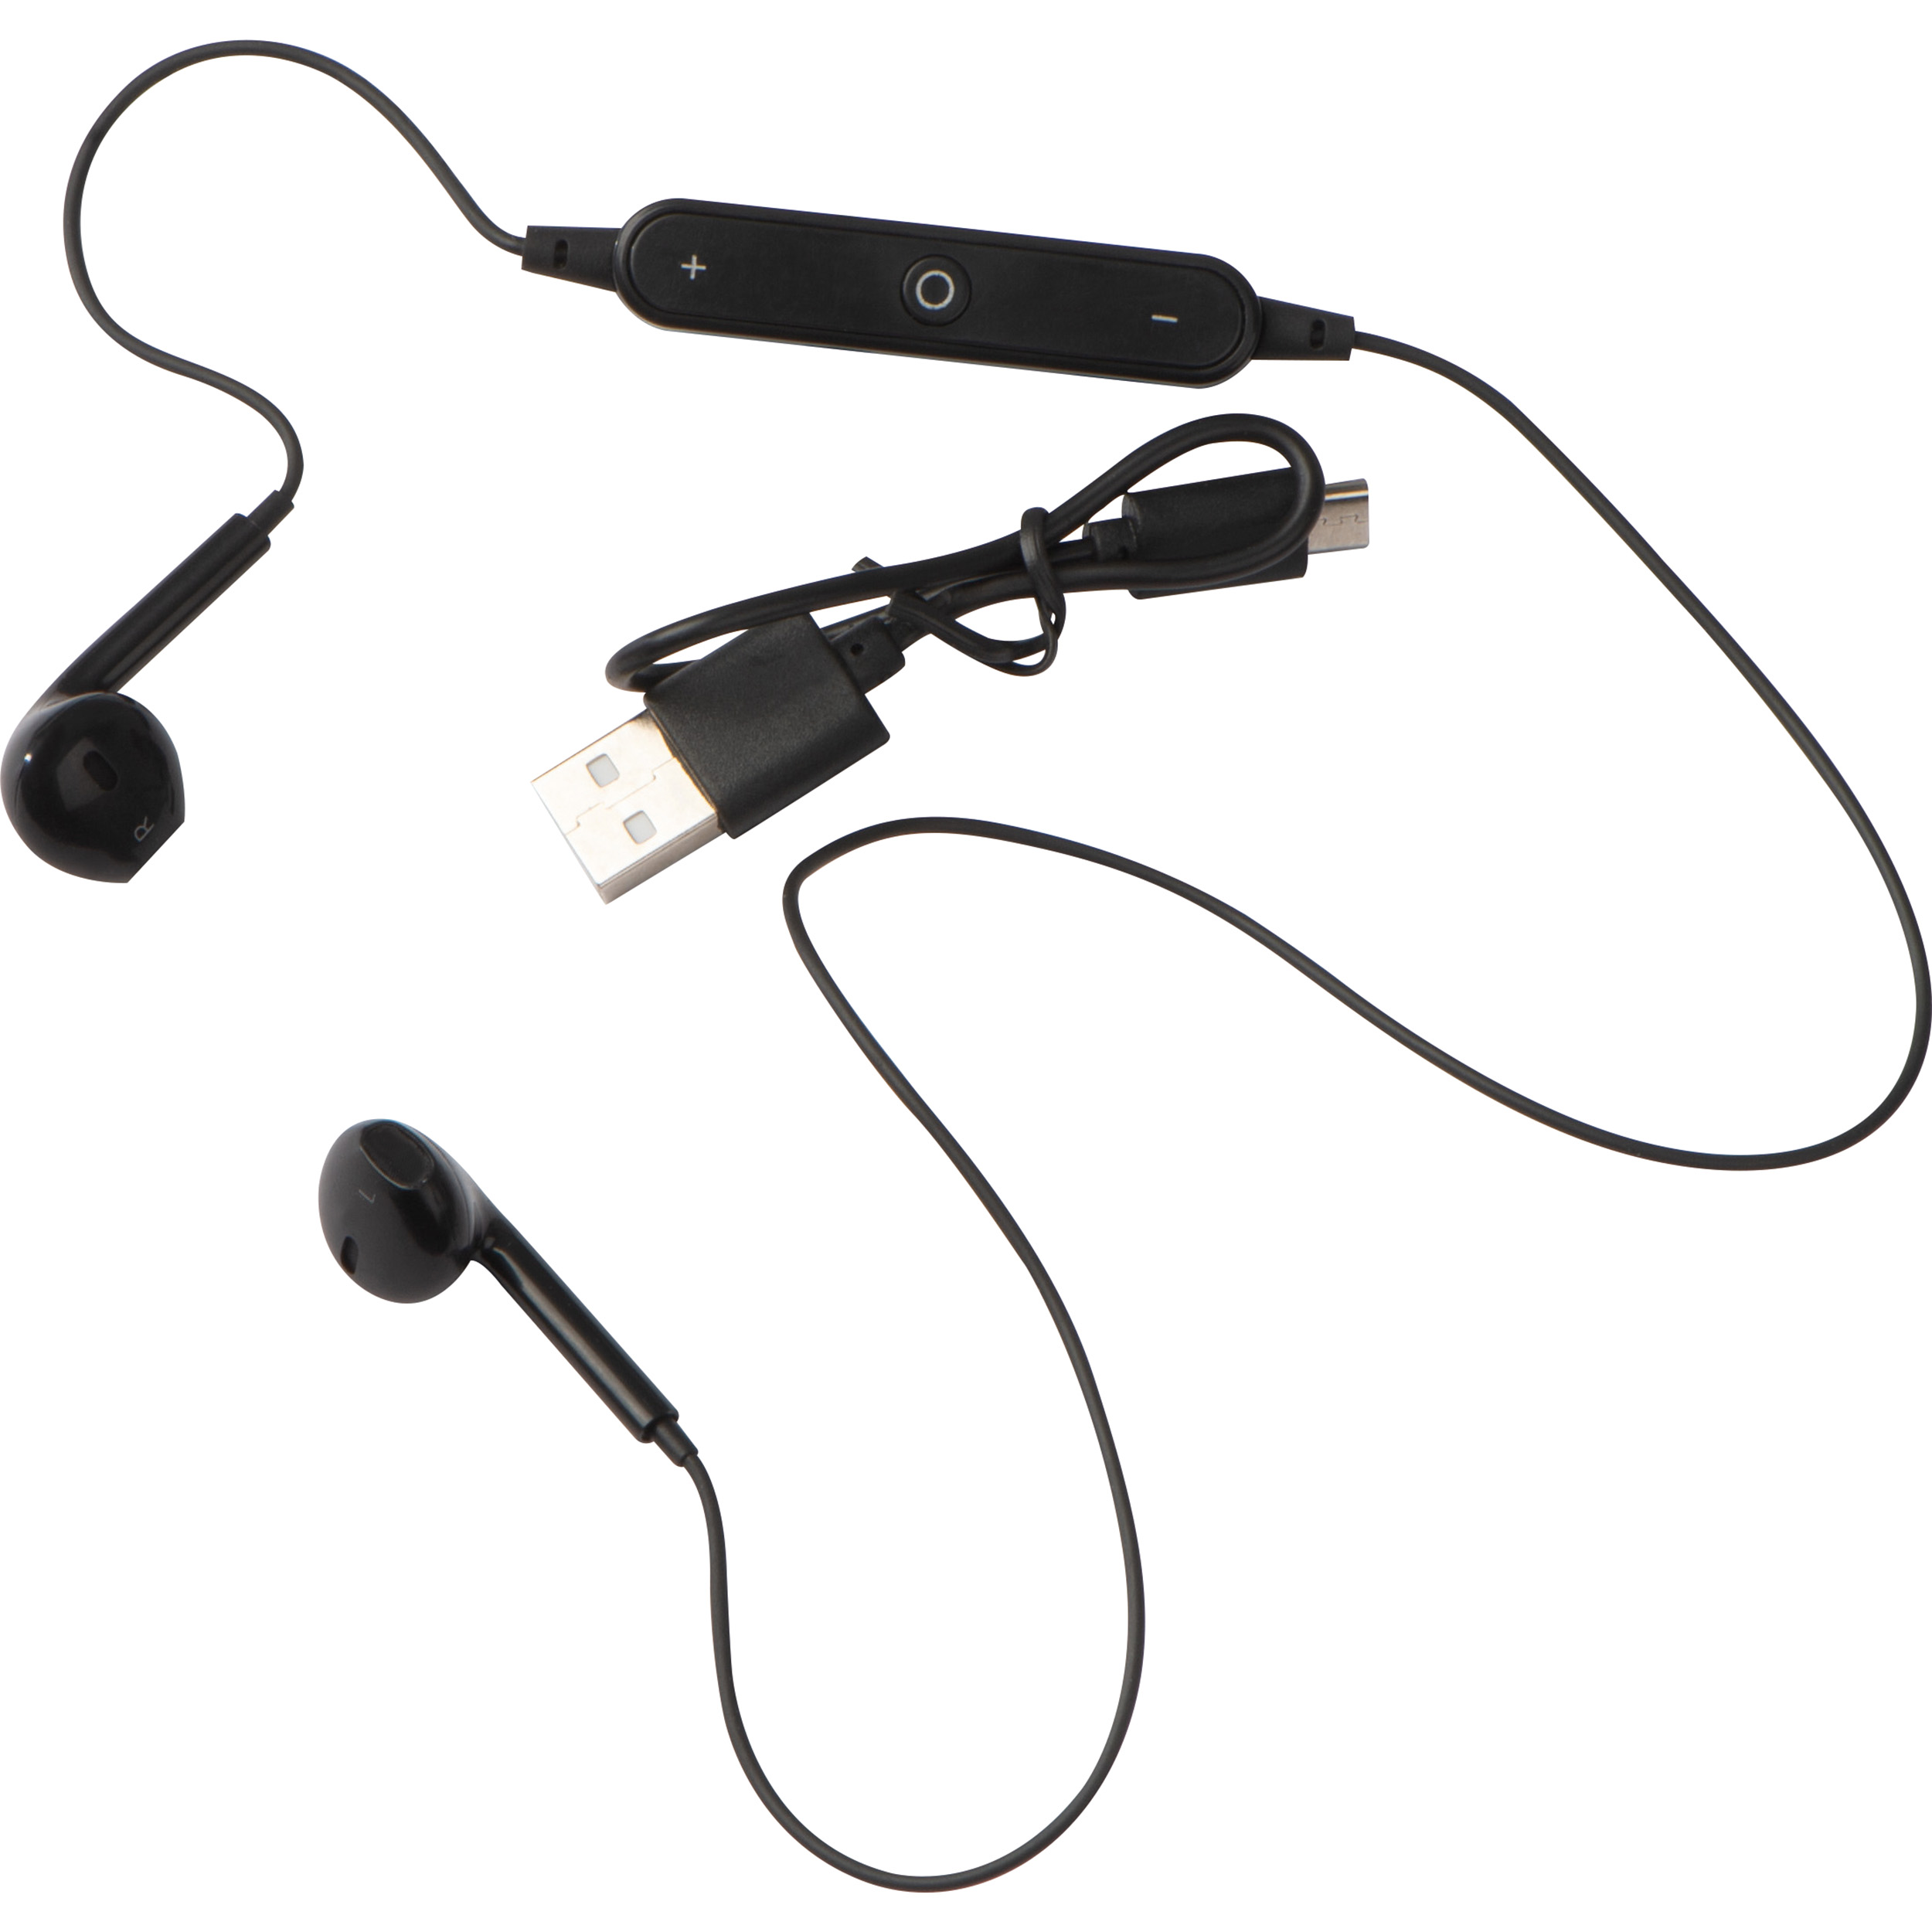 Bluetooth headset in transparent case